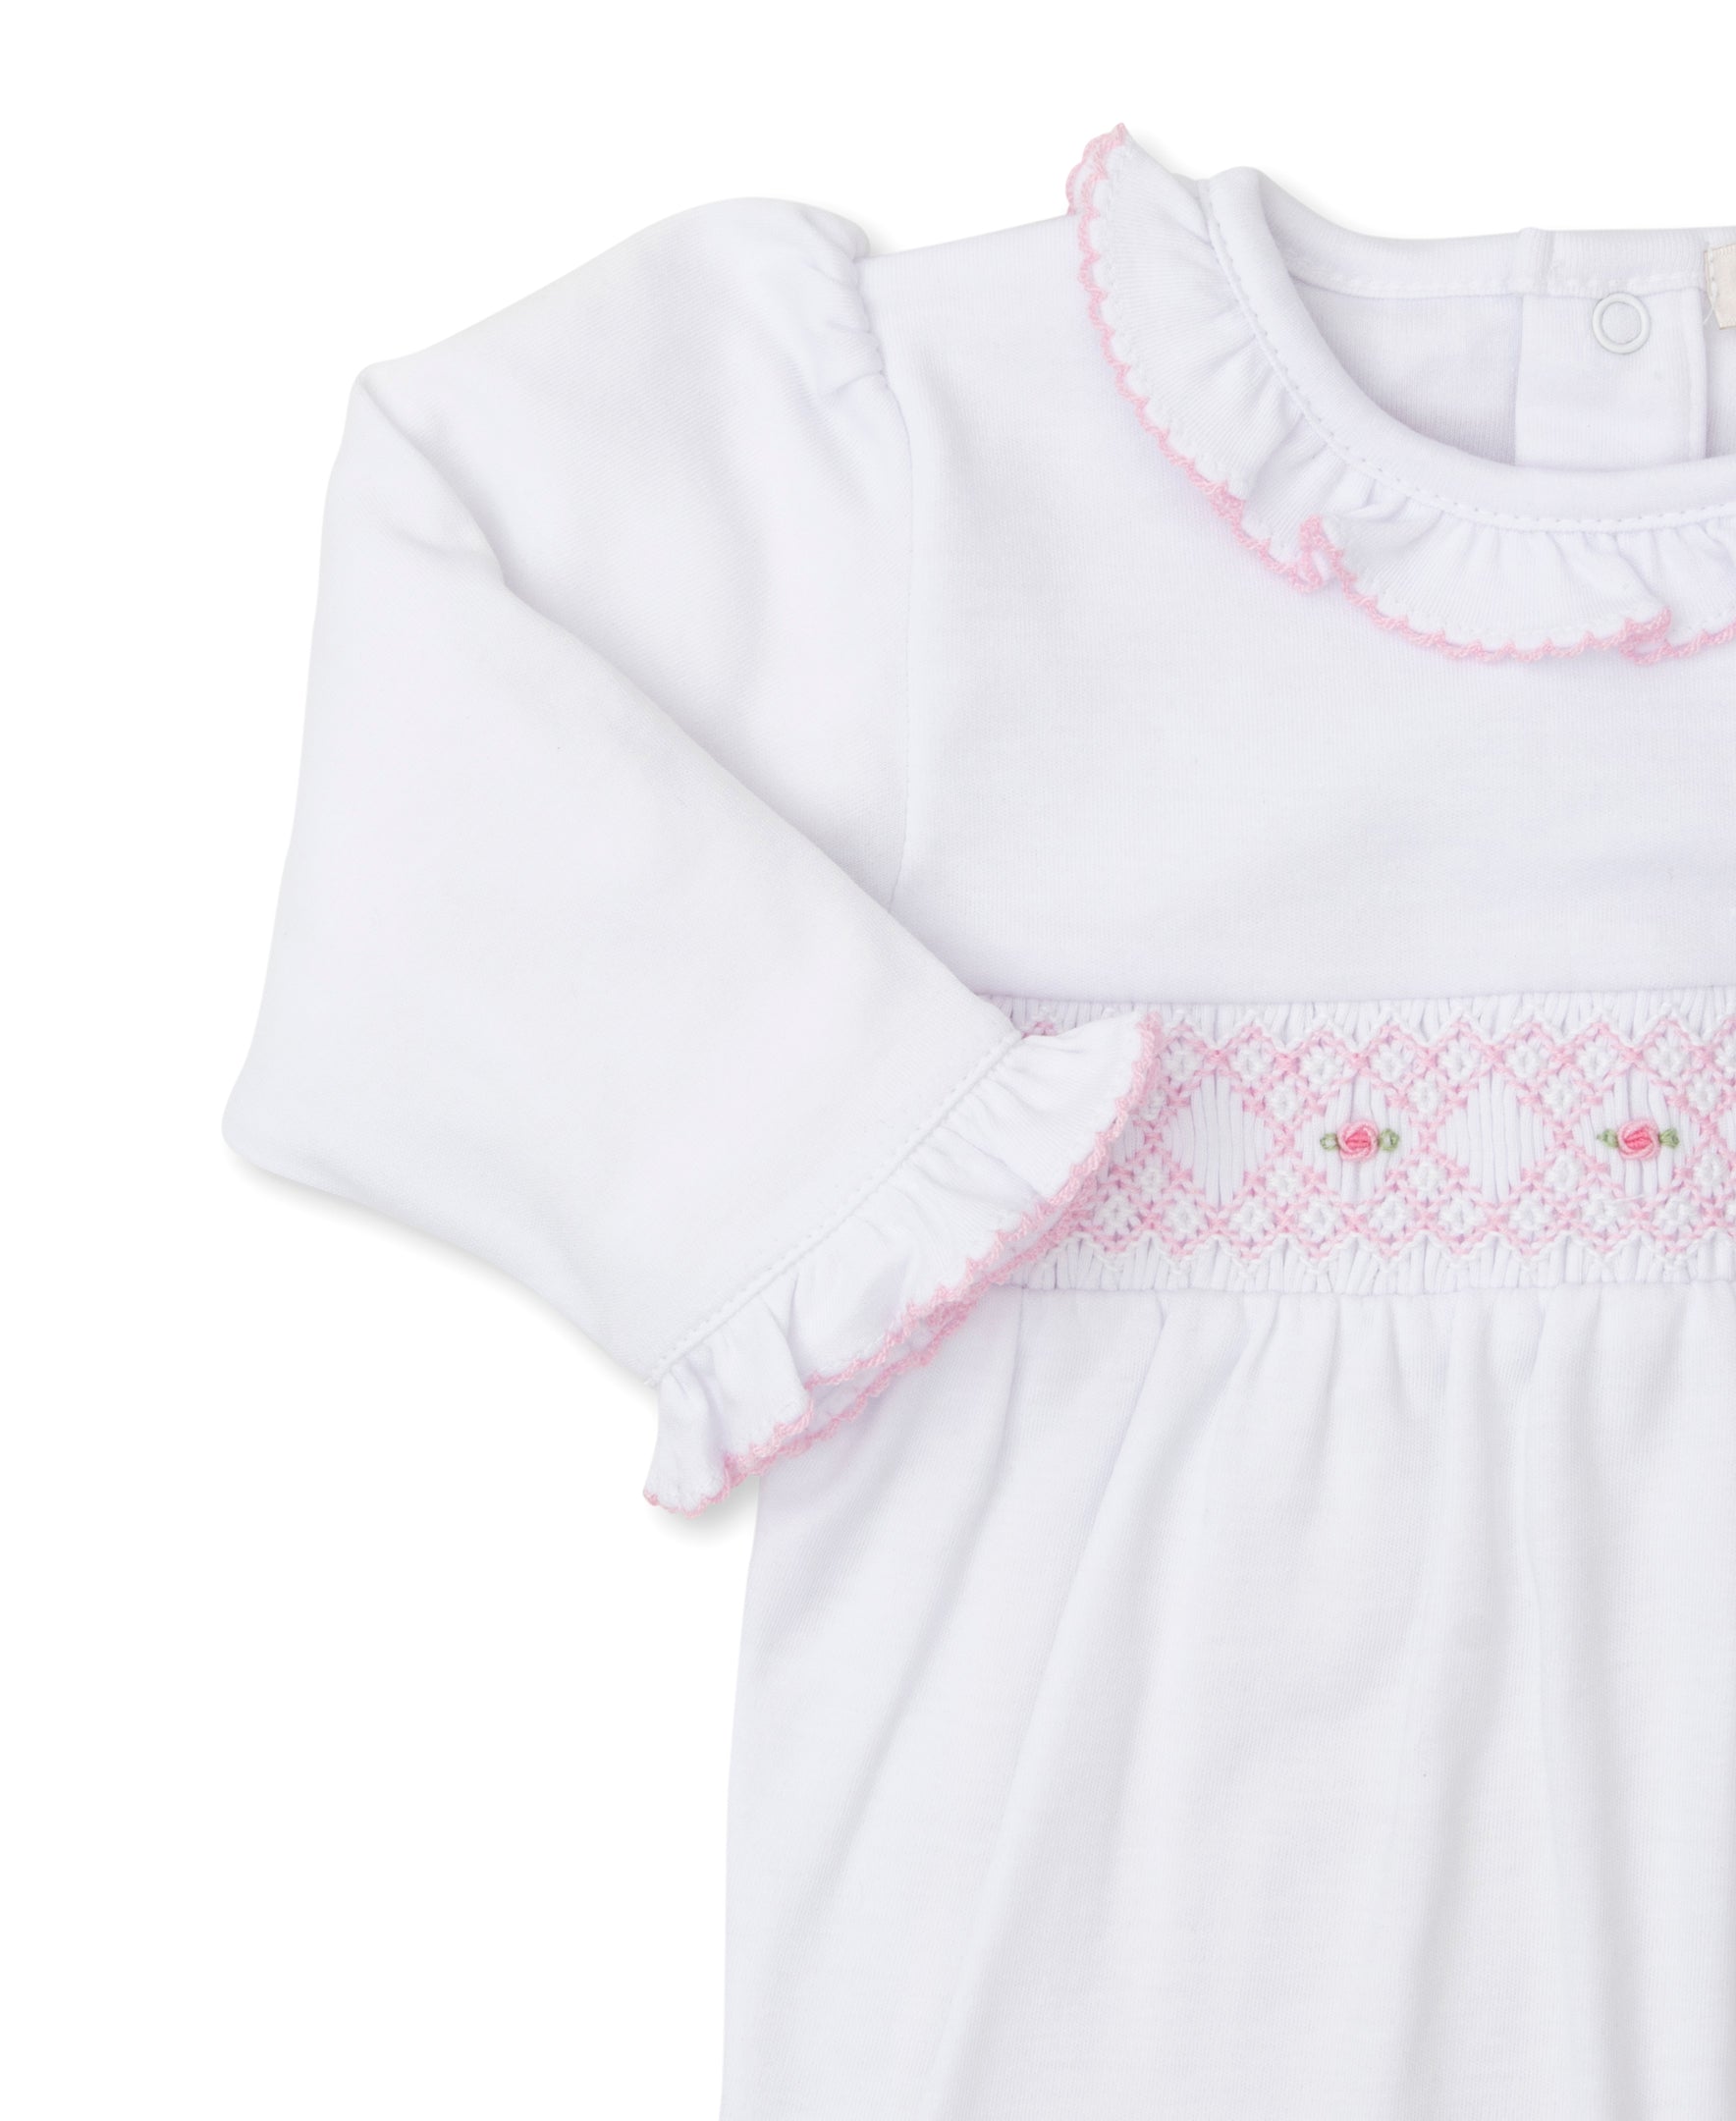 CLB Summer 24 White/Pink Hand Smocked Footie - Kissy Kissy